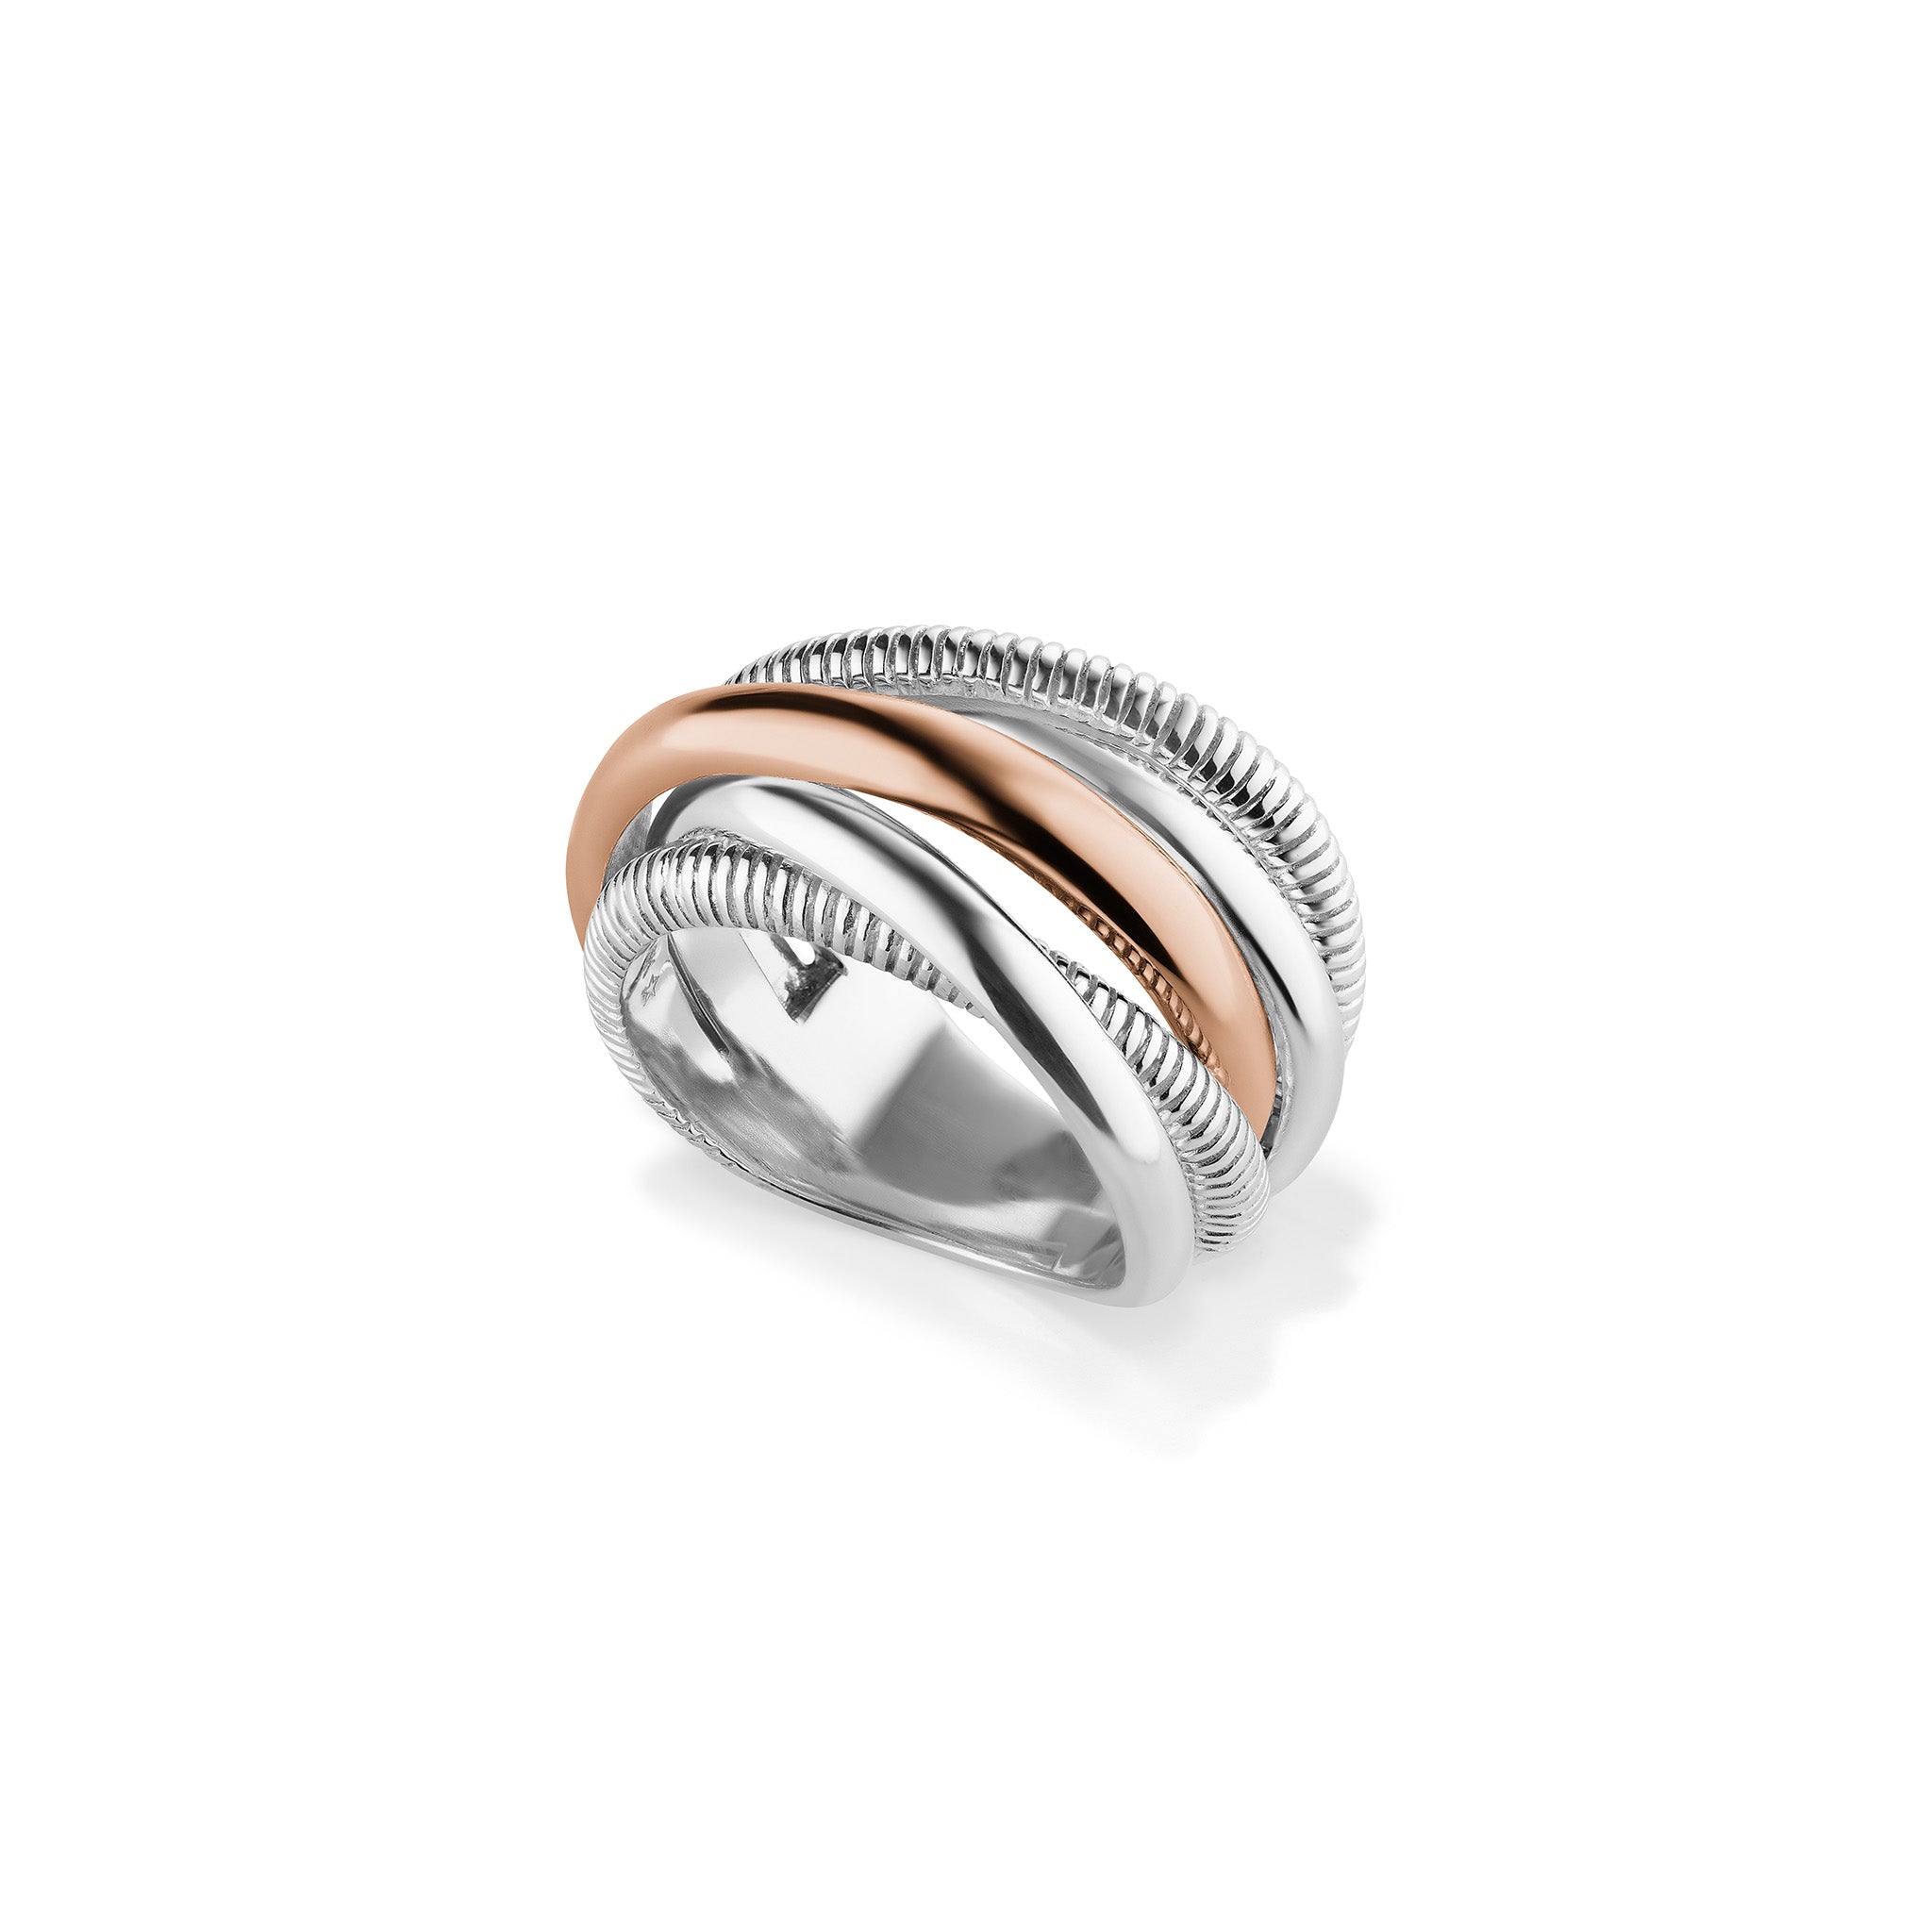 Eternity Five Band Highway Ring with 18K Rose Gold